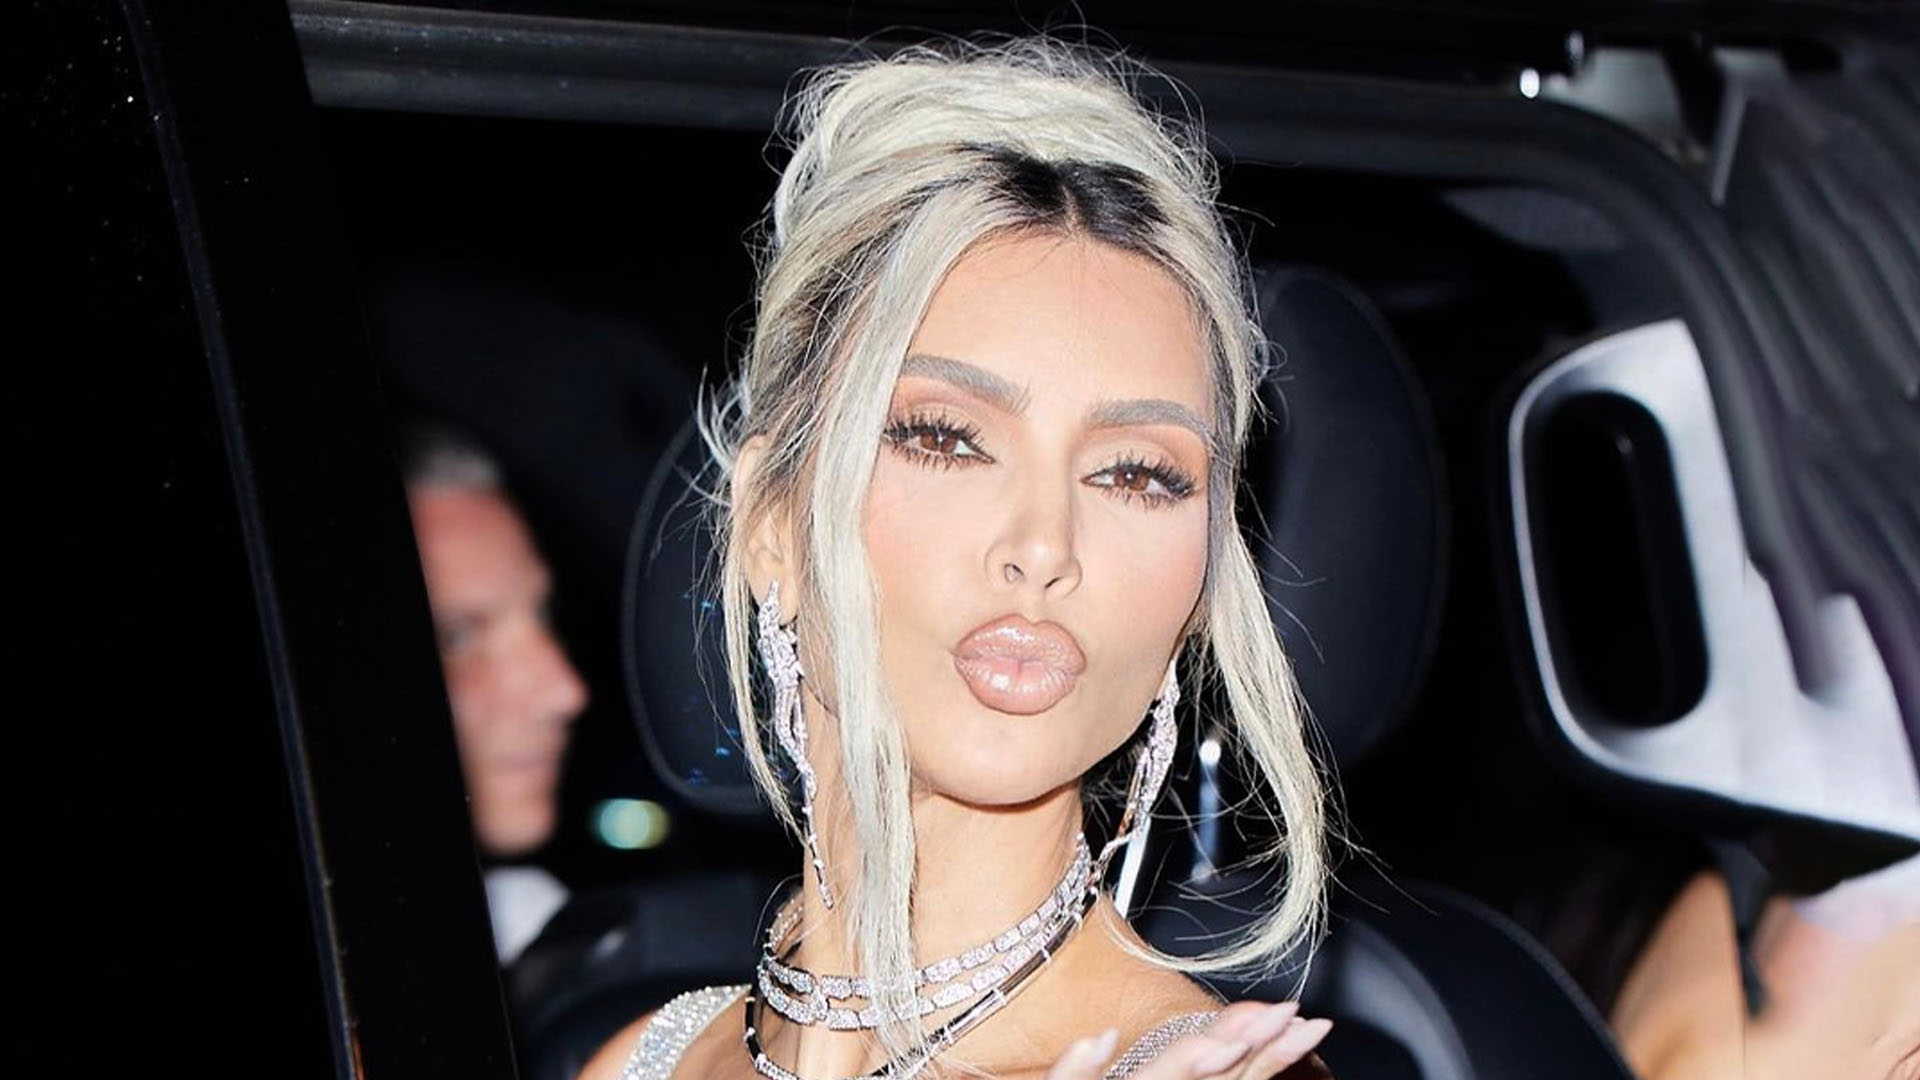 Kim Kardashian’s ex-assistant shared unedit photographs of her star wearing a bra, and shaded her in a 42nd birthday tribute.